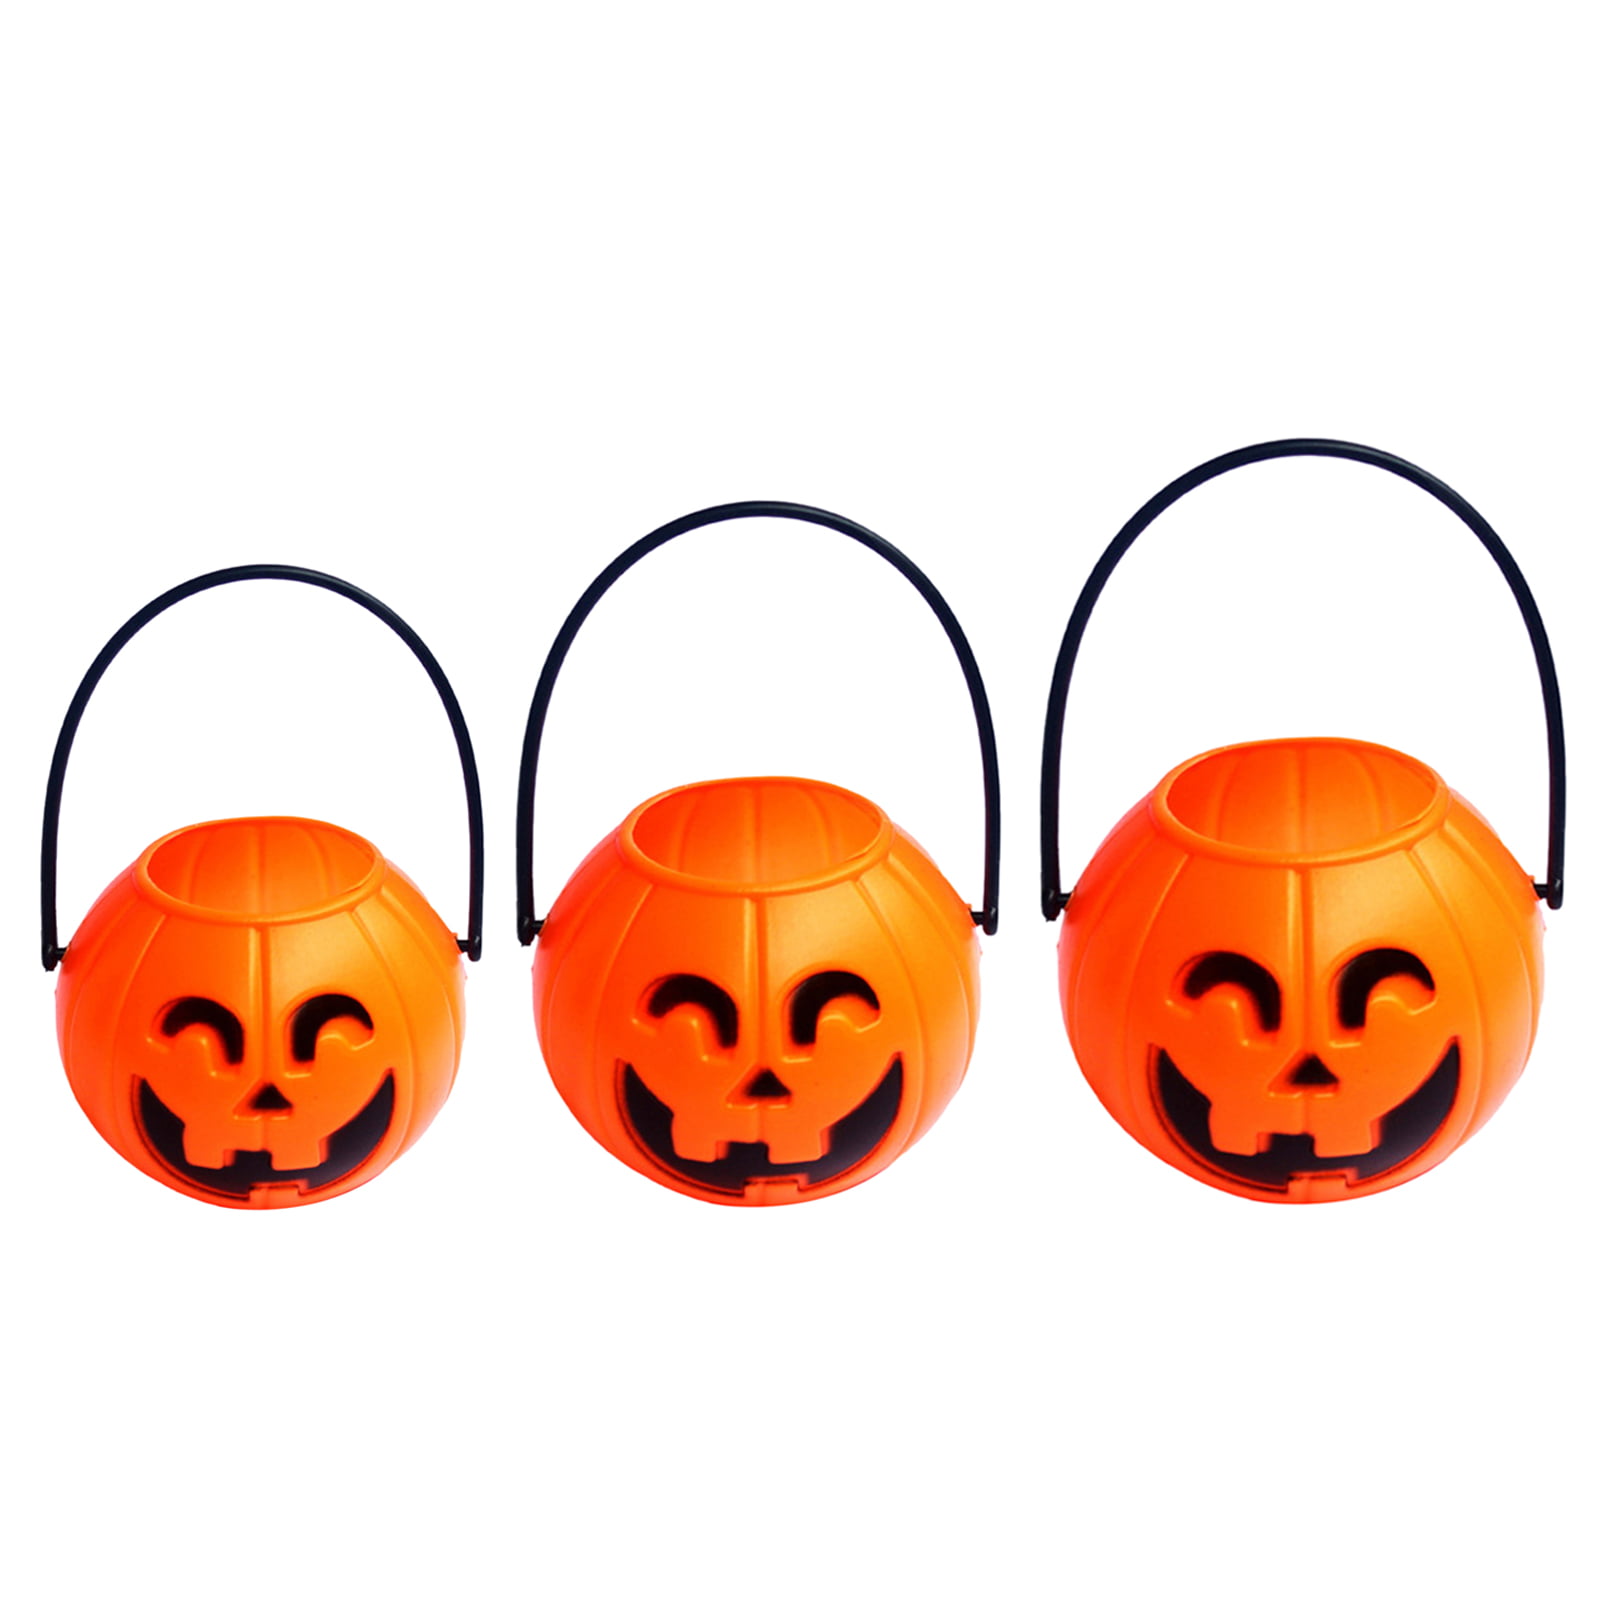 1 x Large Children Halloween Party Decoration Ornaments Candy Jar 1 x Small Candy Basket with Handle Portable Pumpkin Buckets 